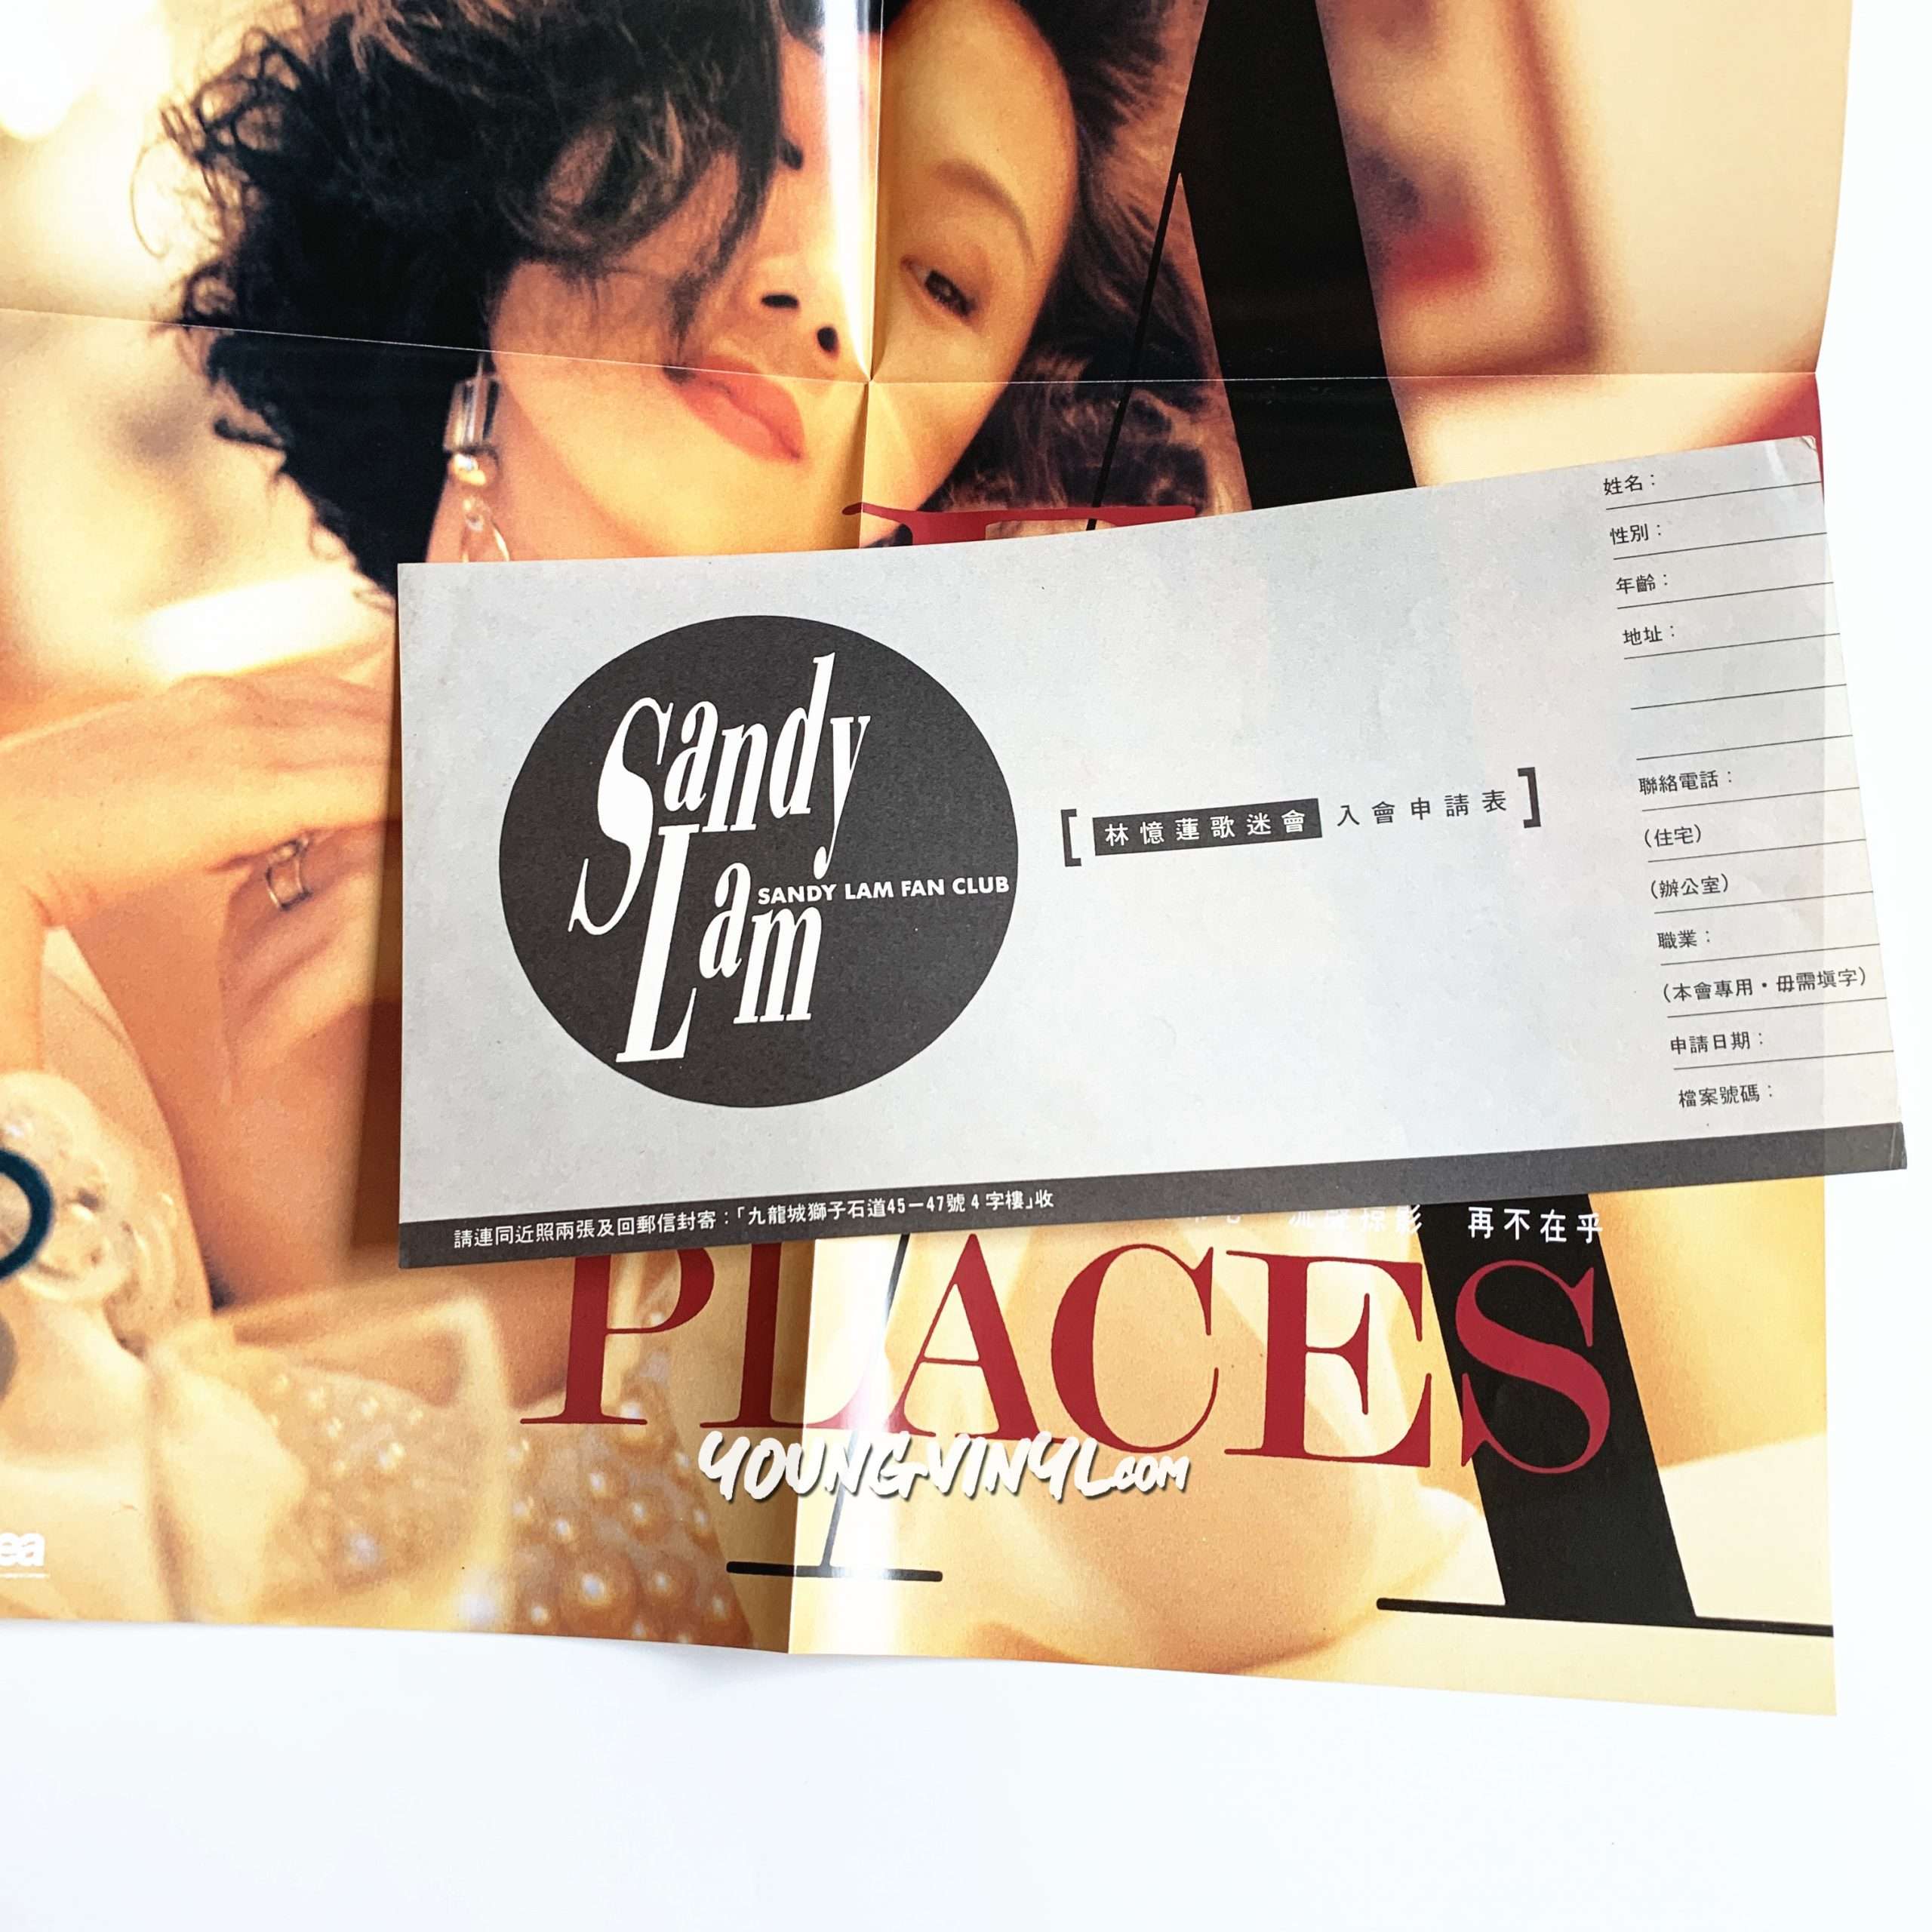 Sandy Lam 都市觸覺Part III Faces And Places Vinyl 林憶蓮黑膠唱片